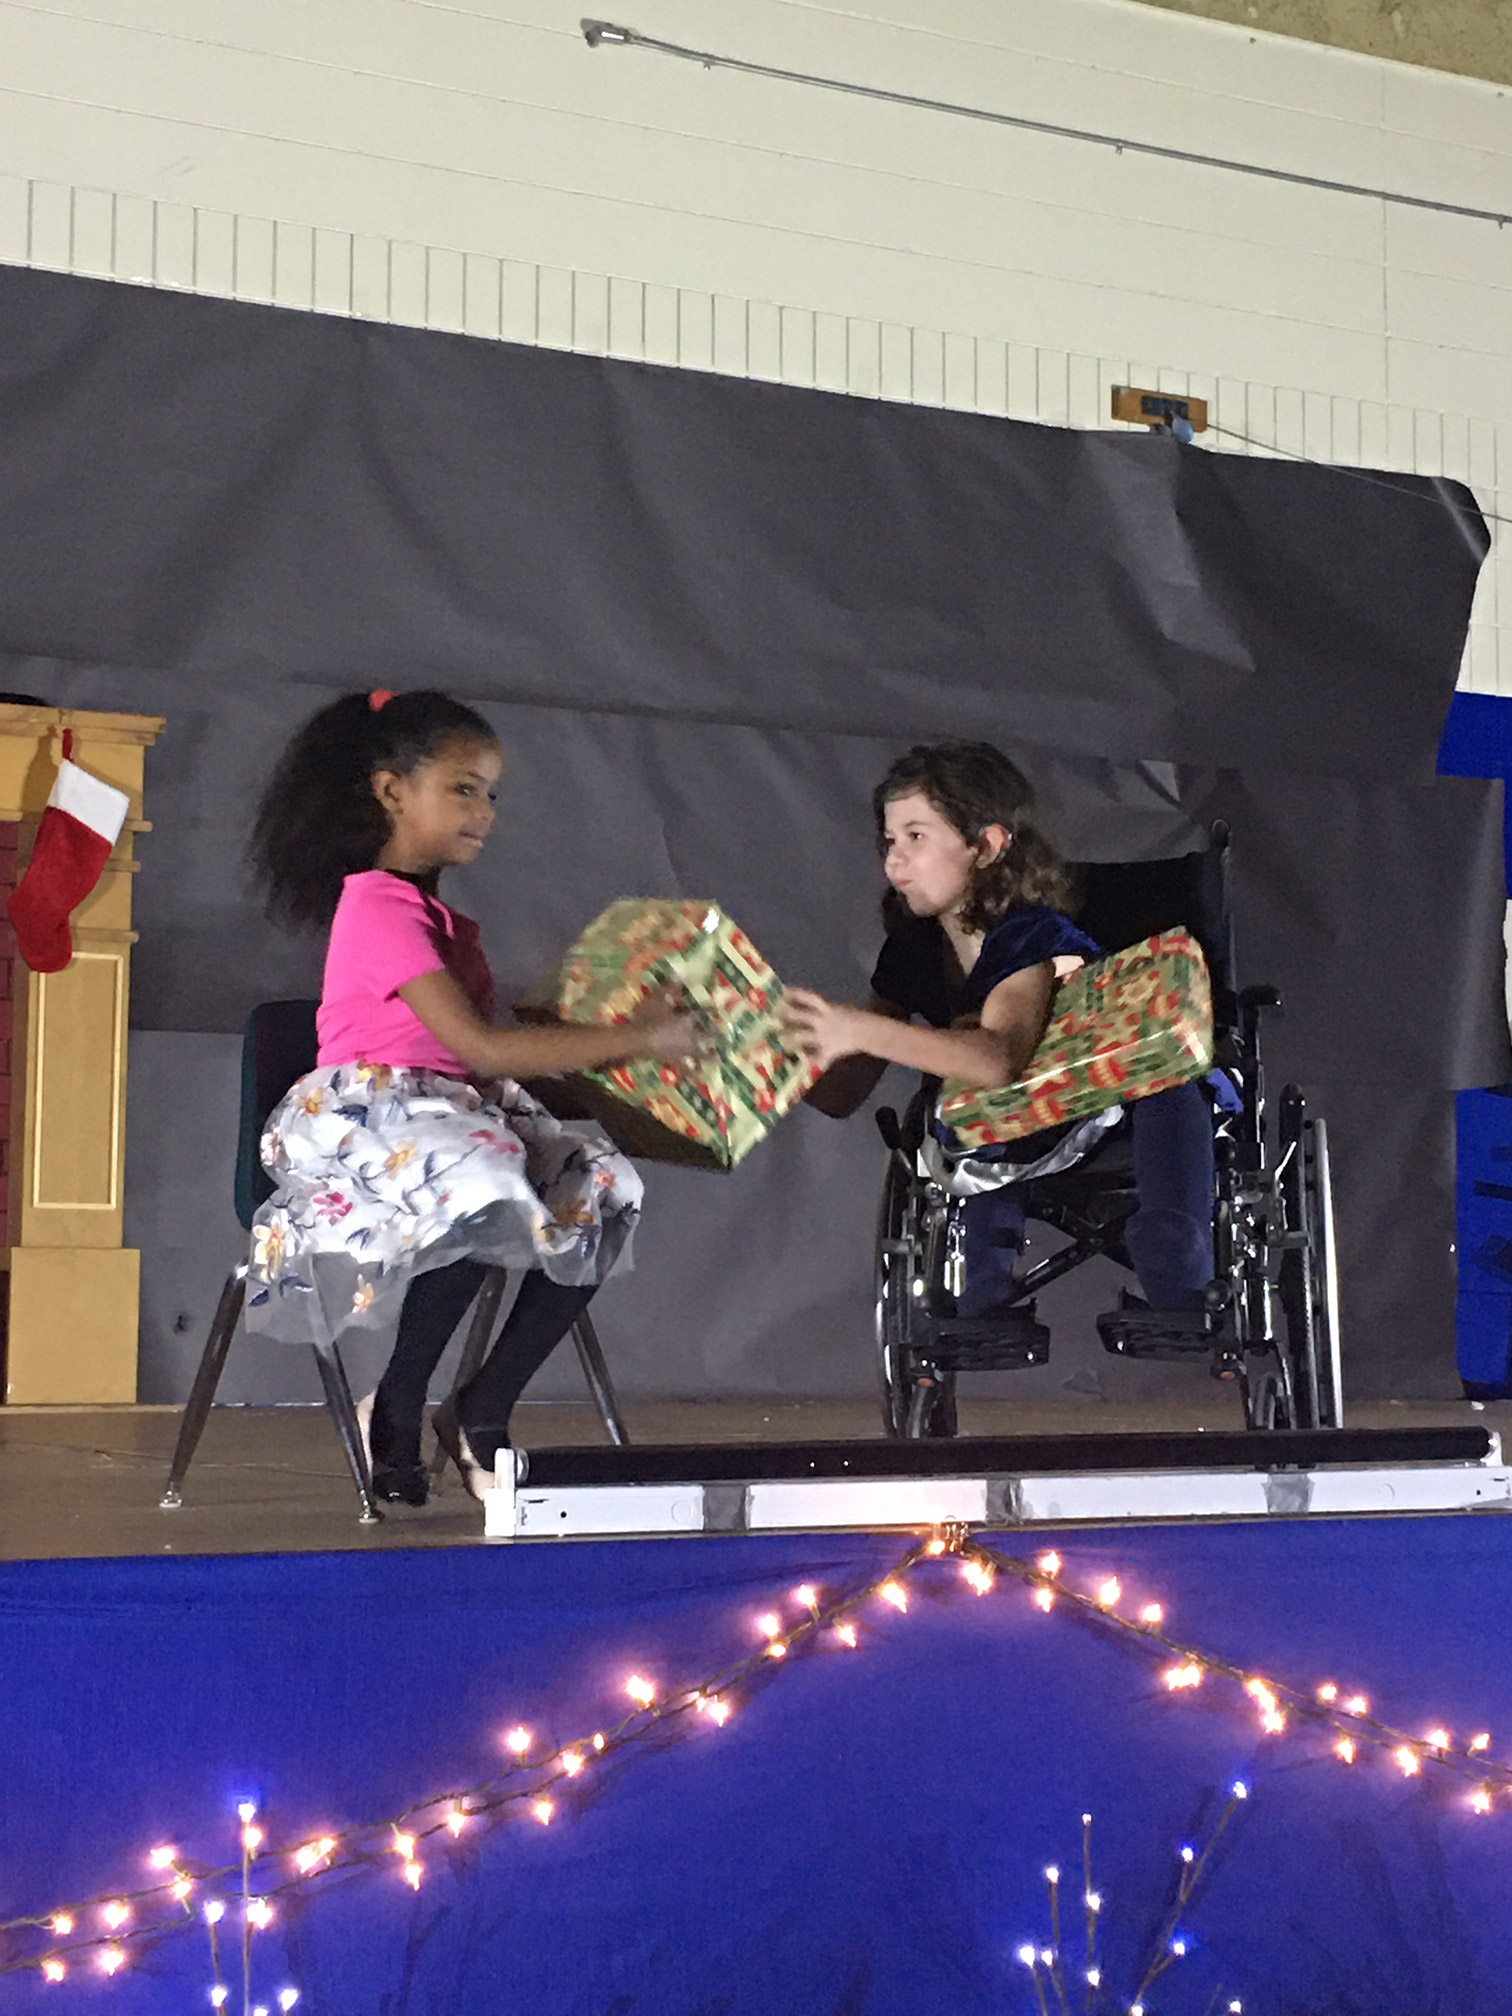 students give gifts to each other